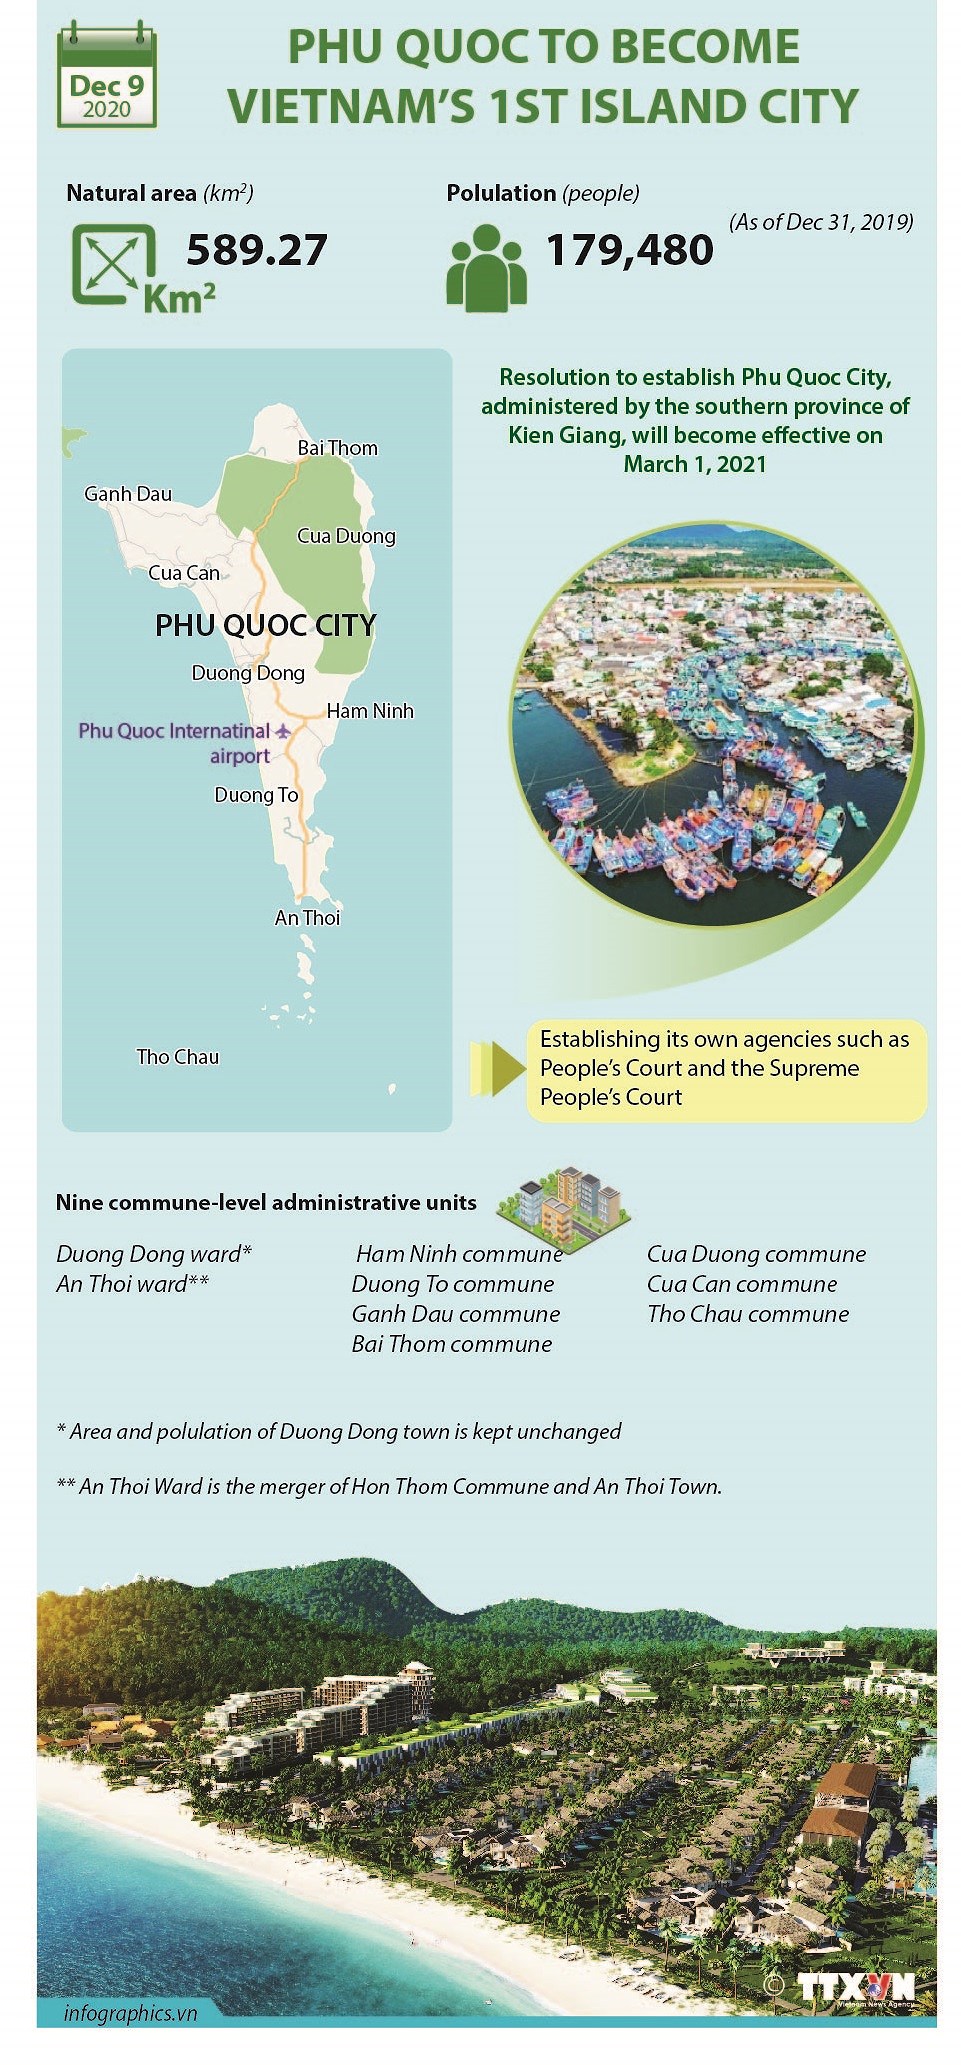 Phu Quoc to become Vietnam's 1st island city hinh anh 1